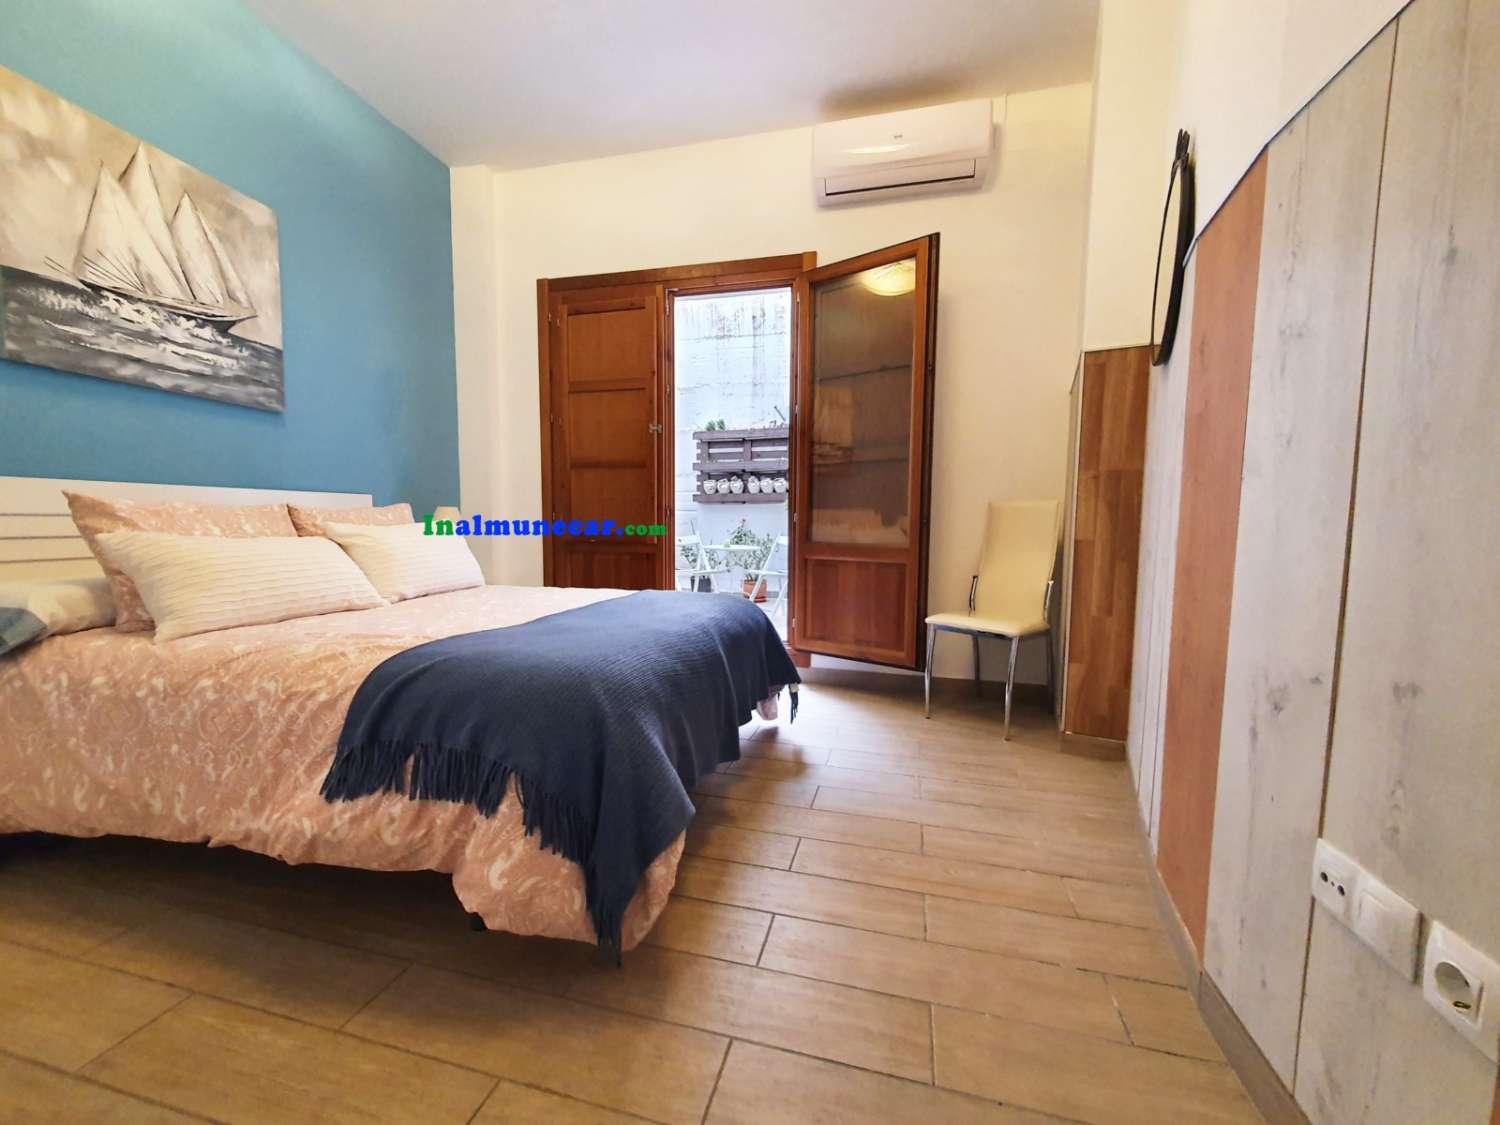 Apartment for sale: in an excellent location in the Old Town of  Almuñécar